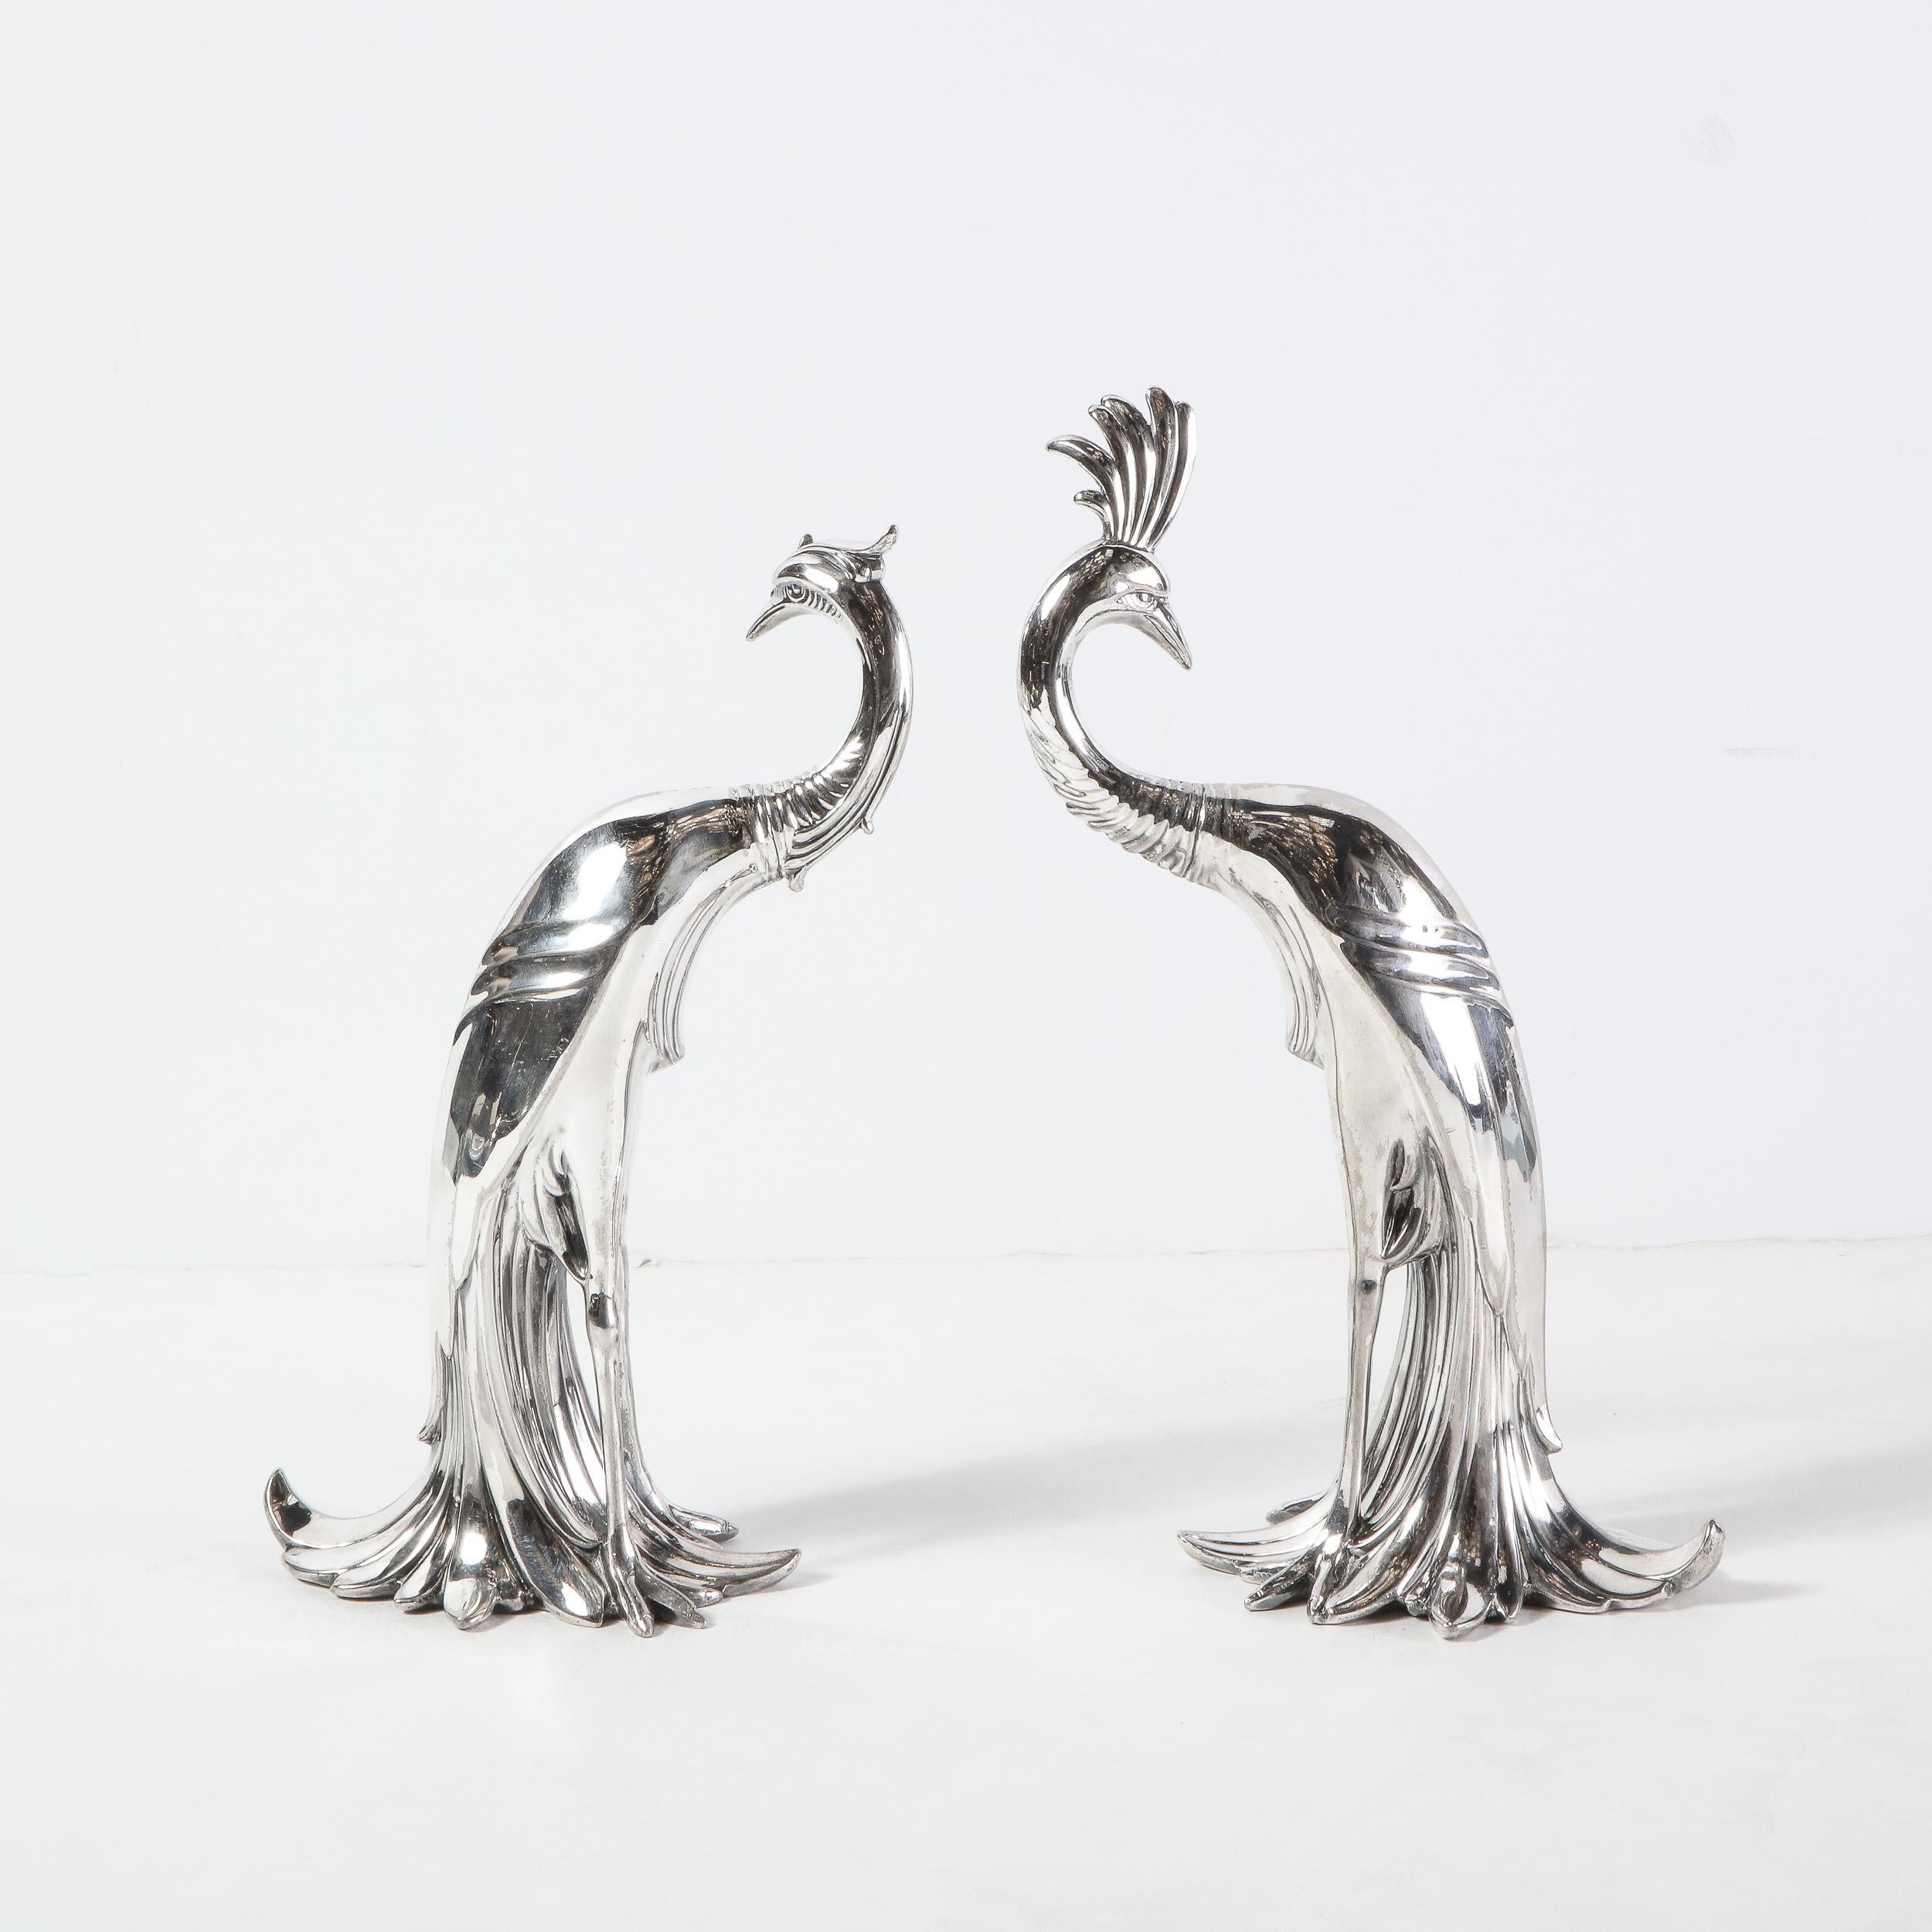 Mid-20th Century Pair of 1930s Art Deco Silverplated Stylized Peacock Sculptures by Weidlich Bros